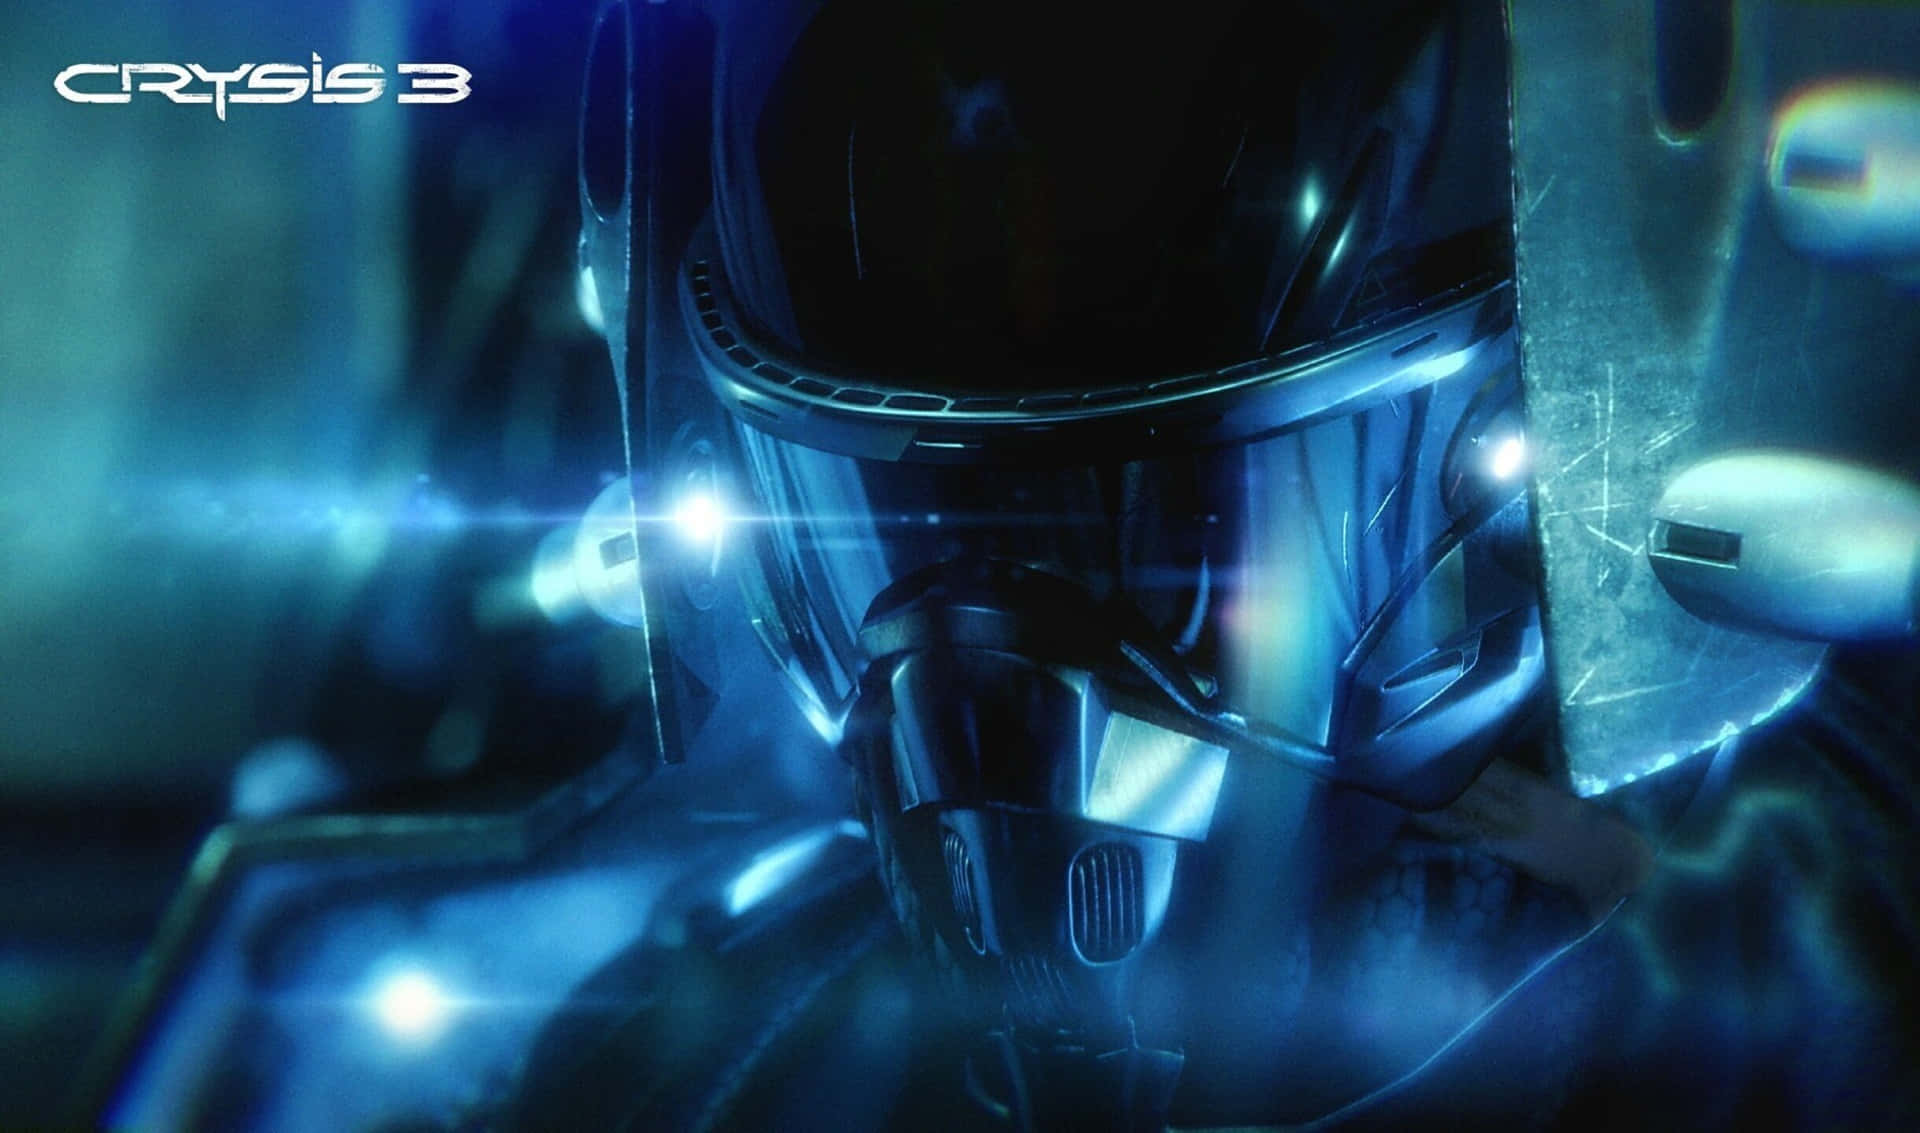 A Man In A Helmet With Blue Lights